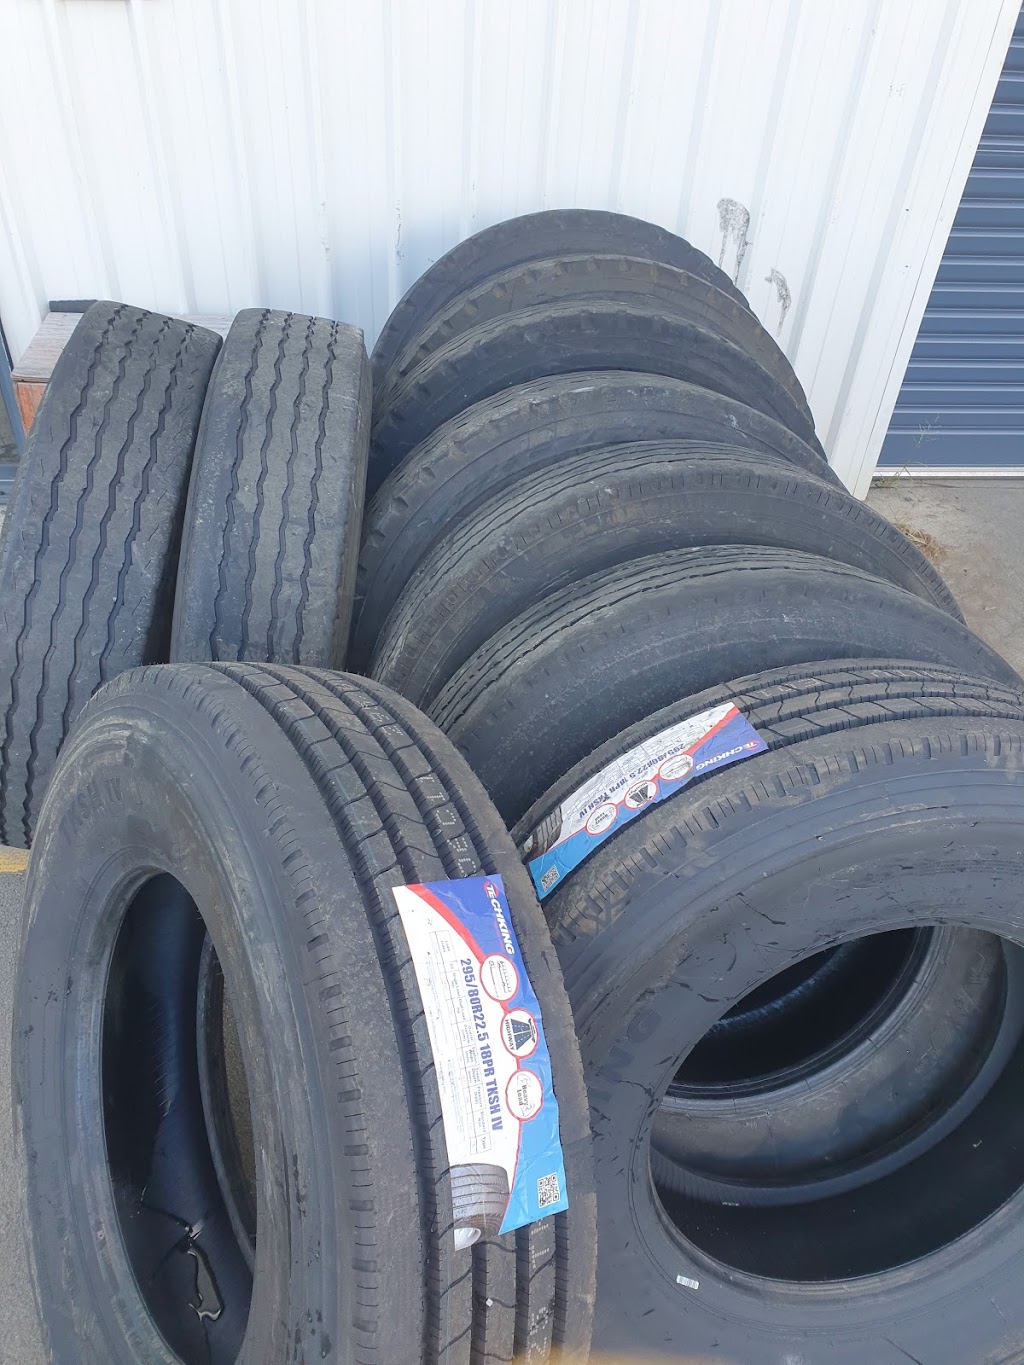 BnS Mobile Tyre Service | 56 Reif St, Flinders View QLD 4305, Australia | Phone: 0448 419 441